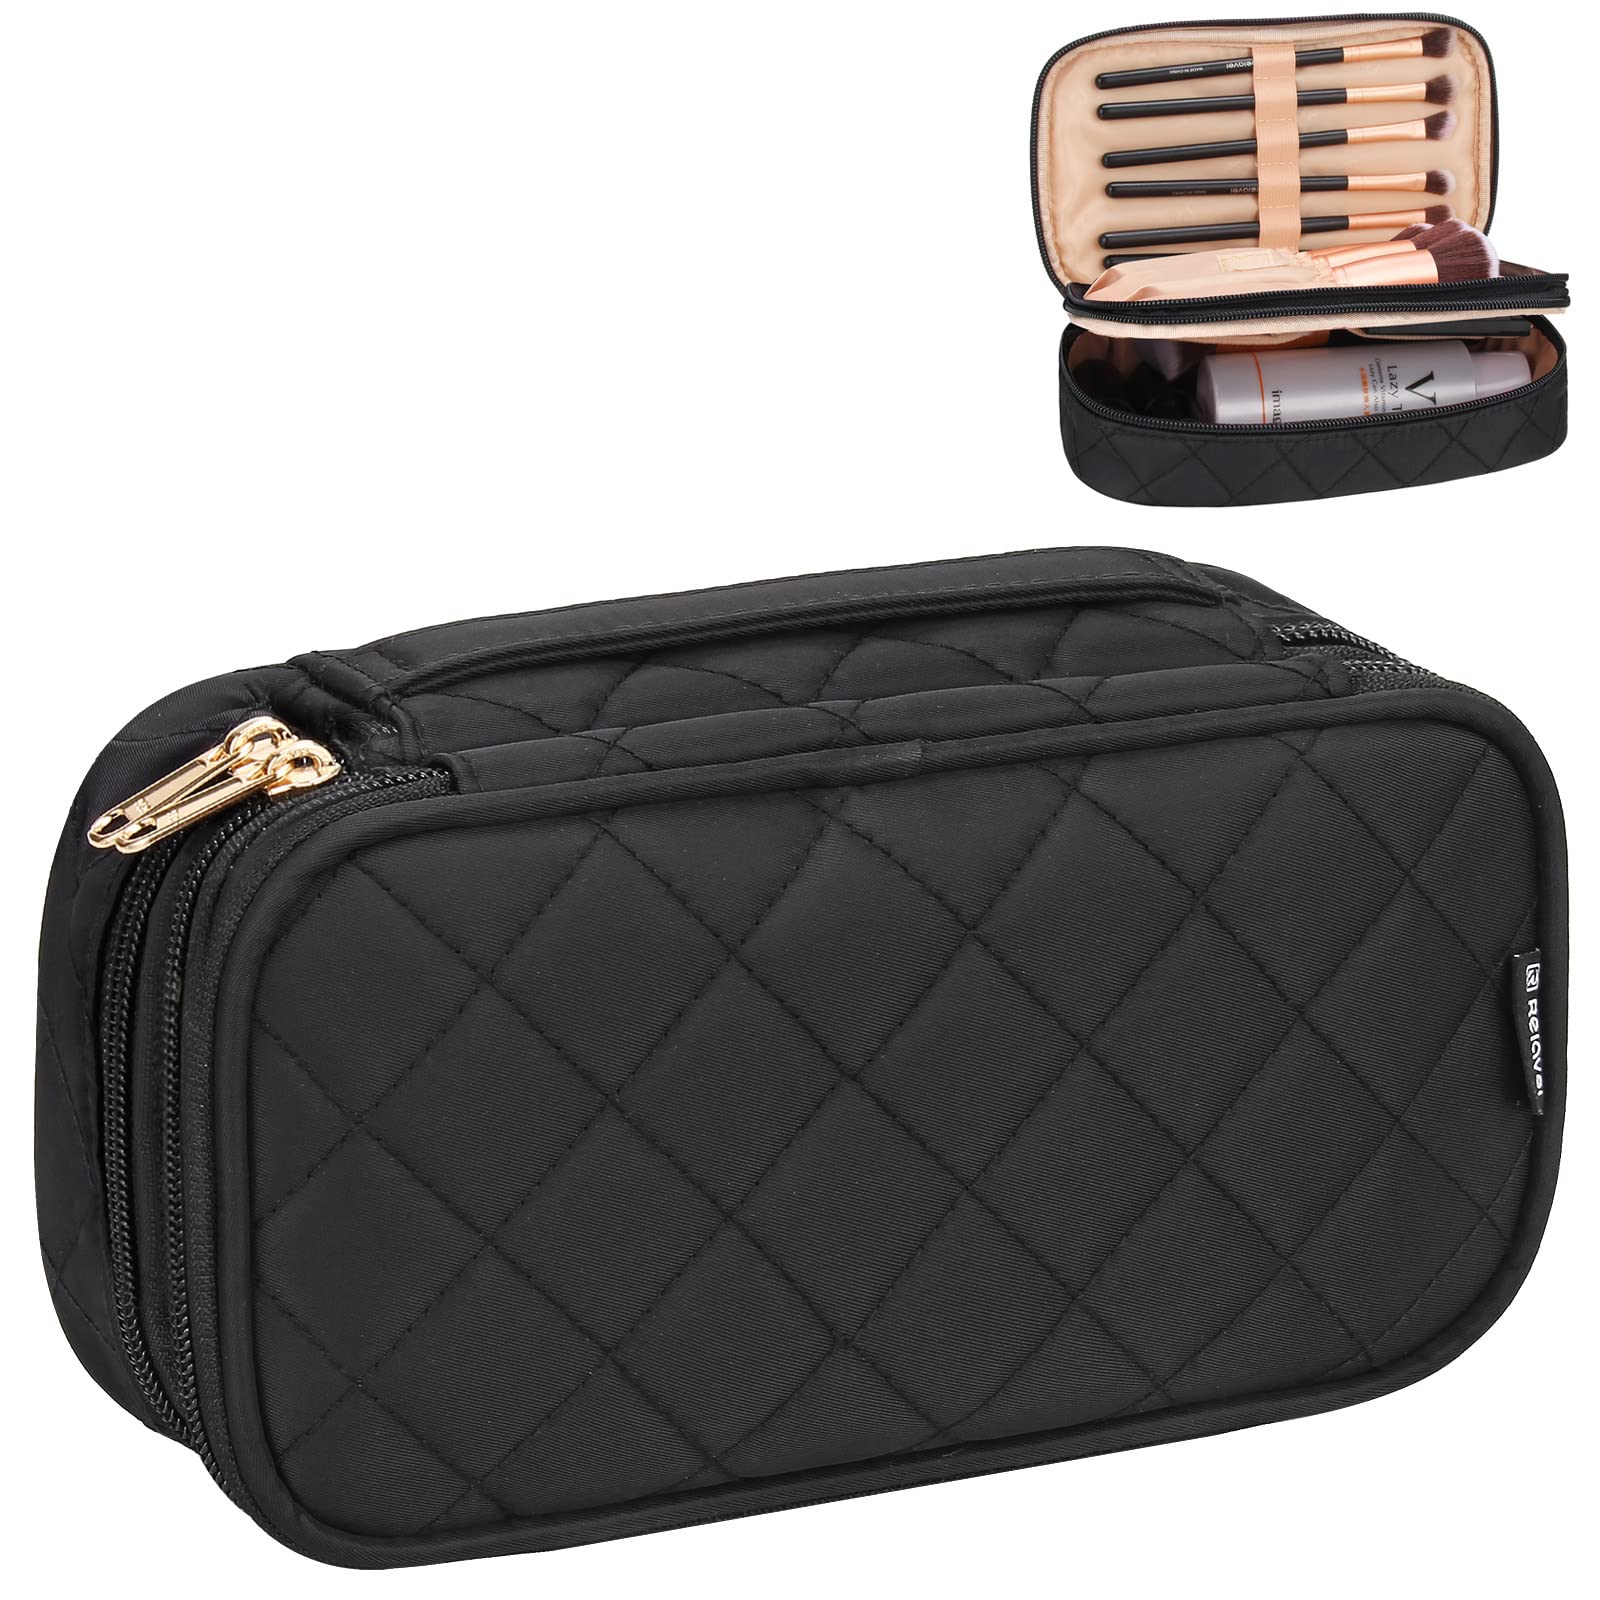 Small Makeup Bag, Relavel Cosmetic Bag for Women 2 Layer Travel Makeup  Organizer Black Handbag Purse Pouch Compact Capacity for Daily Use, Makeup  Brush Holder, Waterproof Nylon, Durable Zipper (Black) Small Black